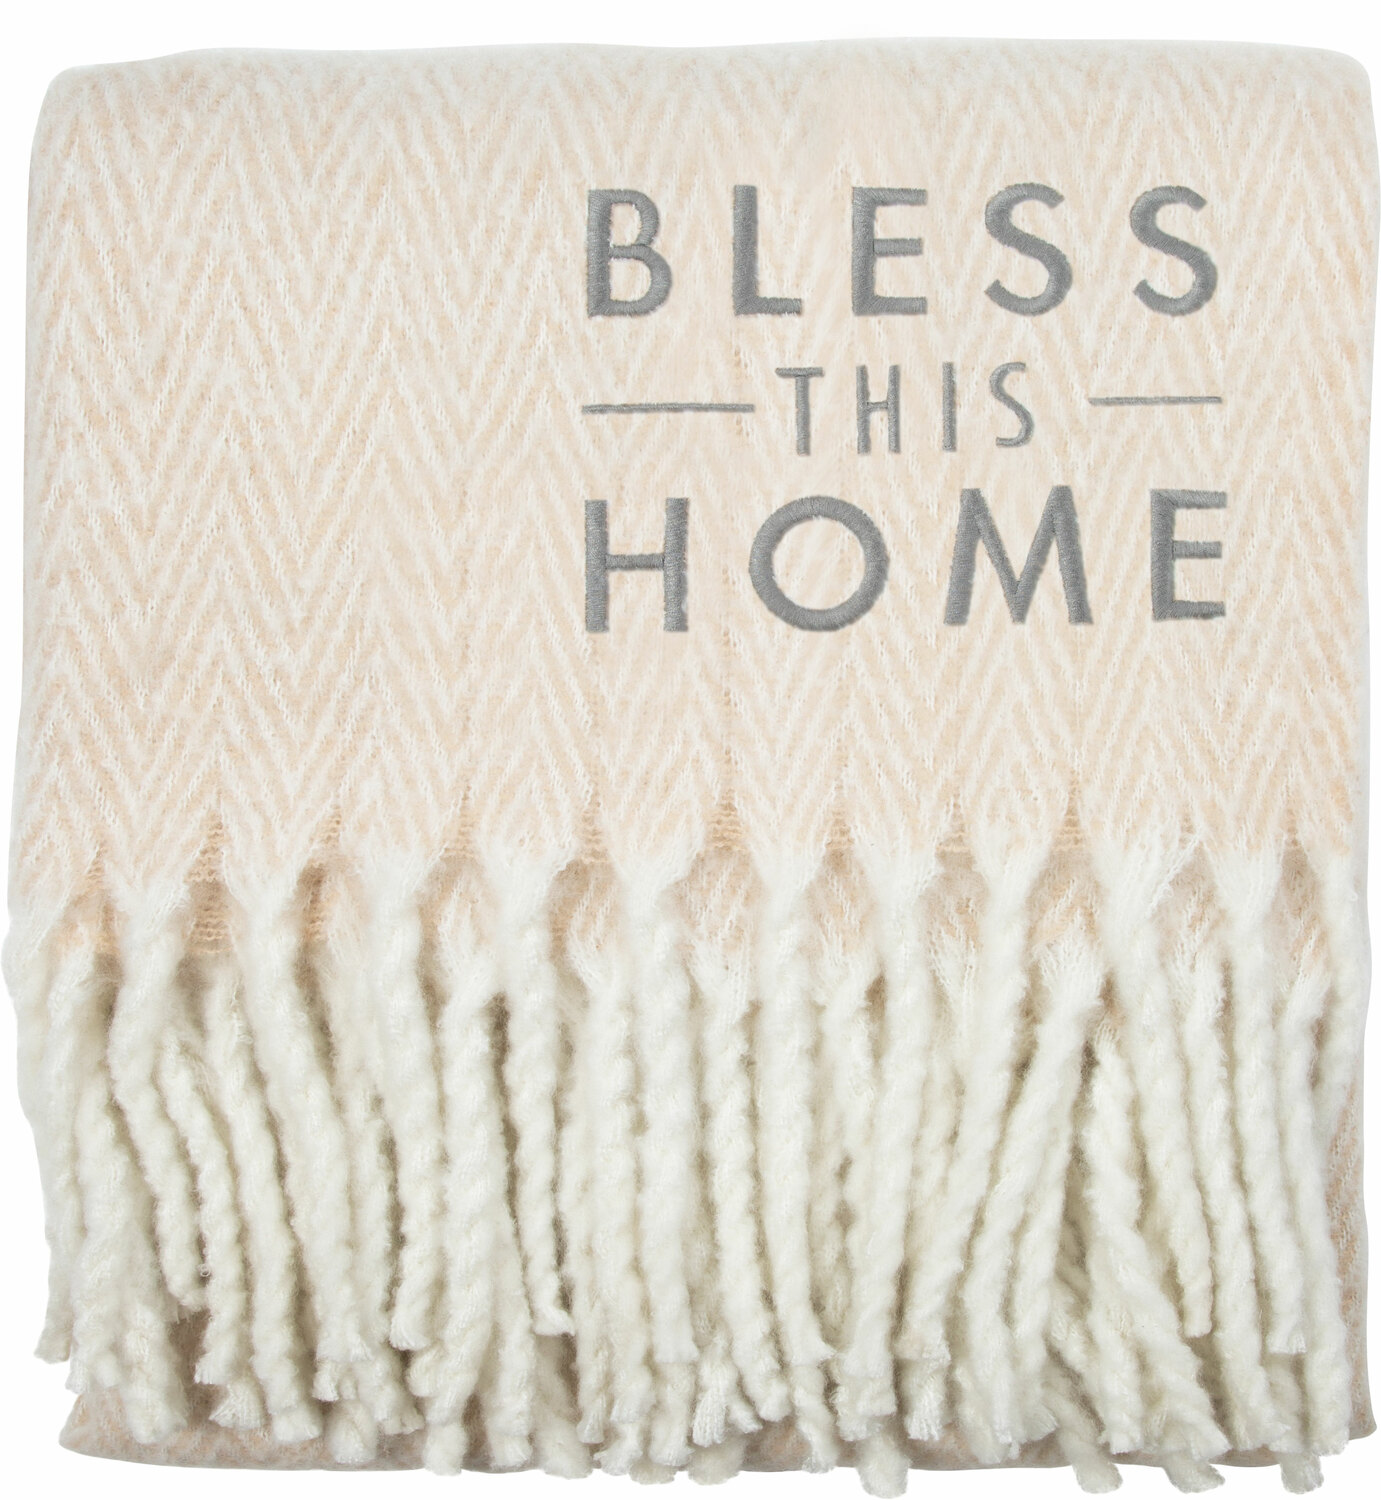 Bless This Home by Open Door Decor - Bless This Home - 50" x 60" Herringbone  Blanket